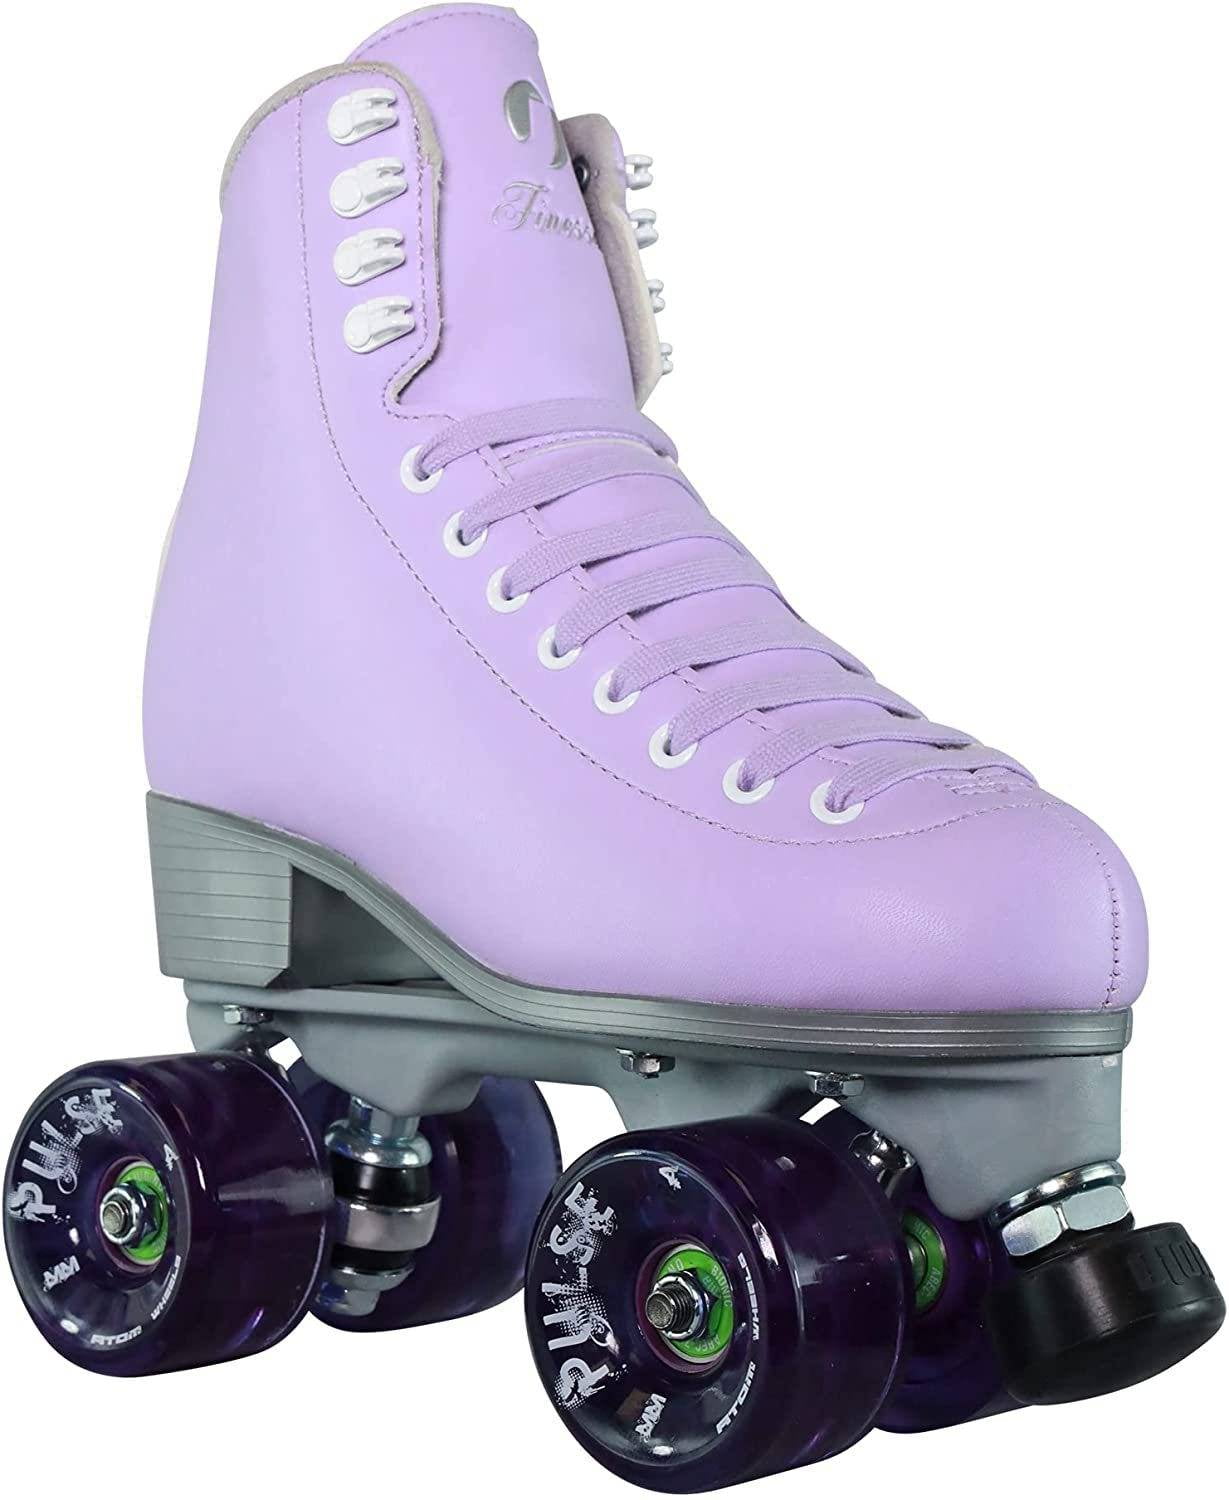 Women Outdoor High Top Roller Skates Size 4-11 With Atom Pulse Wheels 